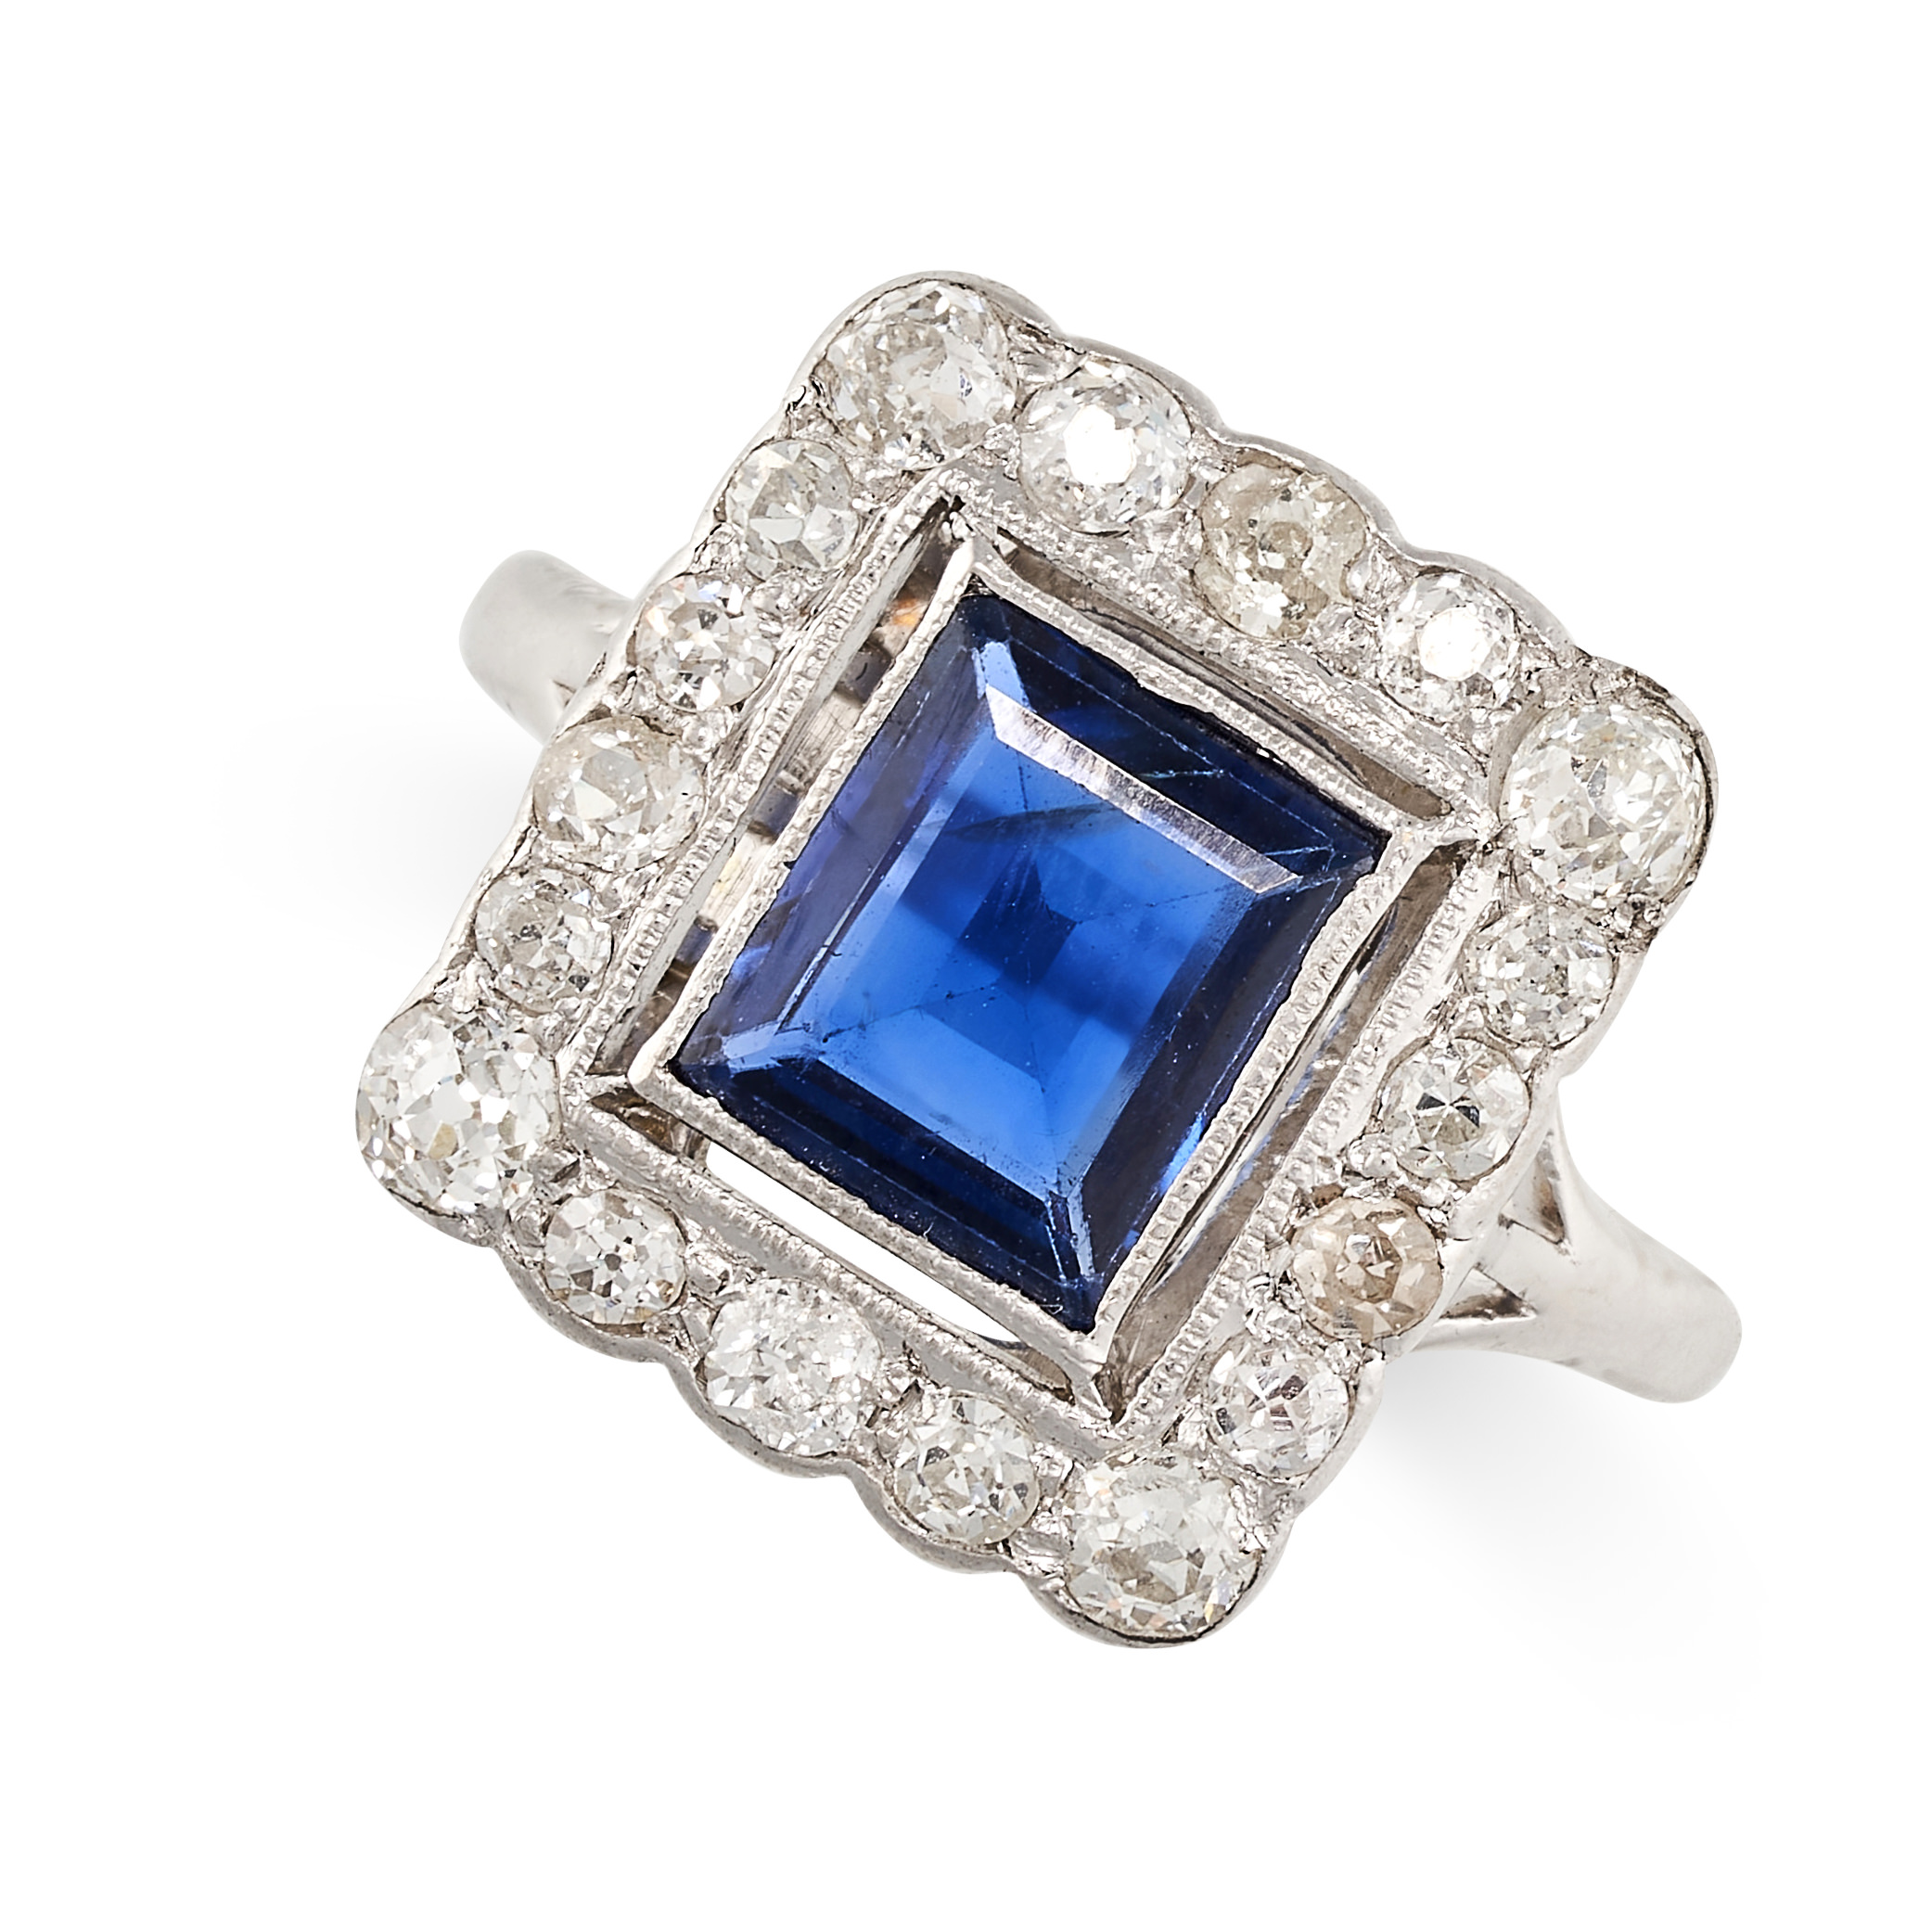 A SAPPHIRE AND DIAMOND RING set with a rectangular step cut blue sapphire of 1.24 carats within a